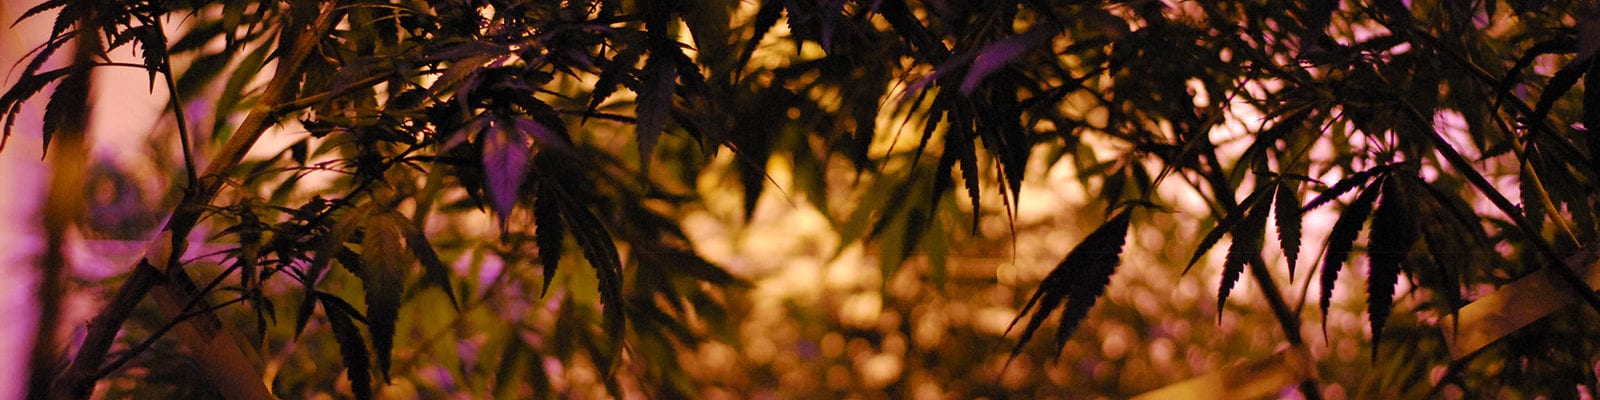 Indoor cannabis plants inside of a cultivation site licensed under Washington state's I-502 adult-use cannabis marketplace.